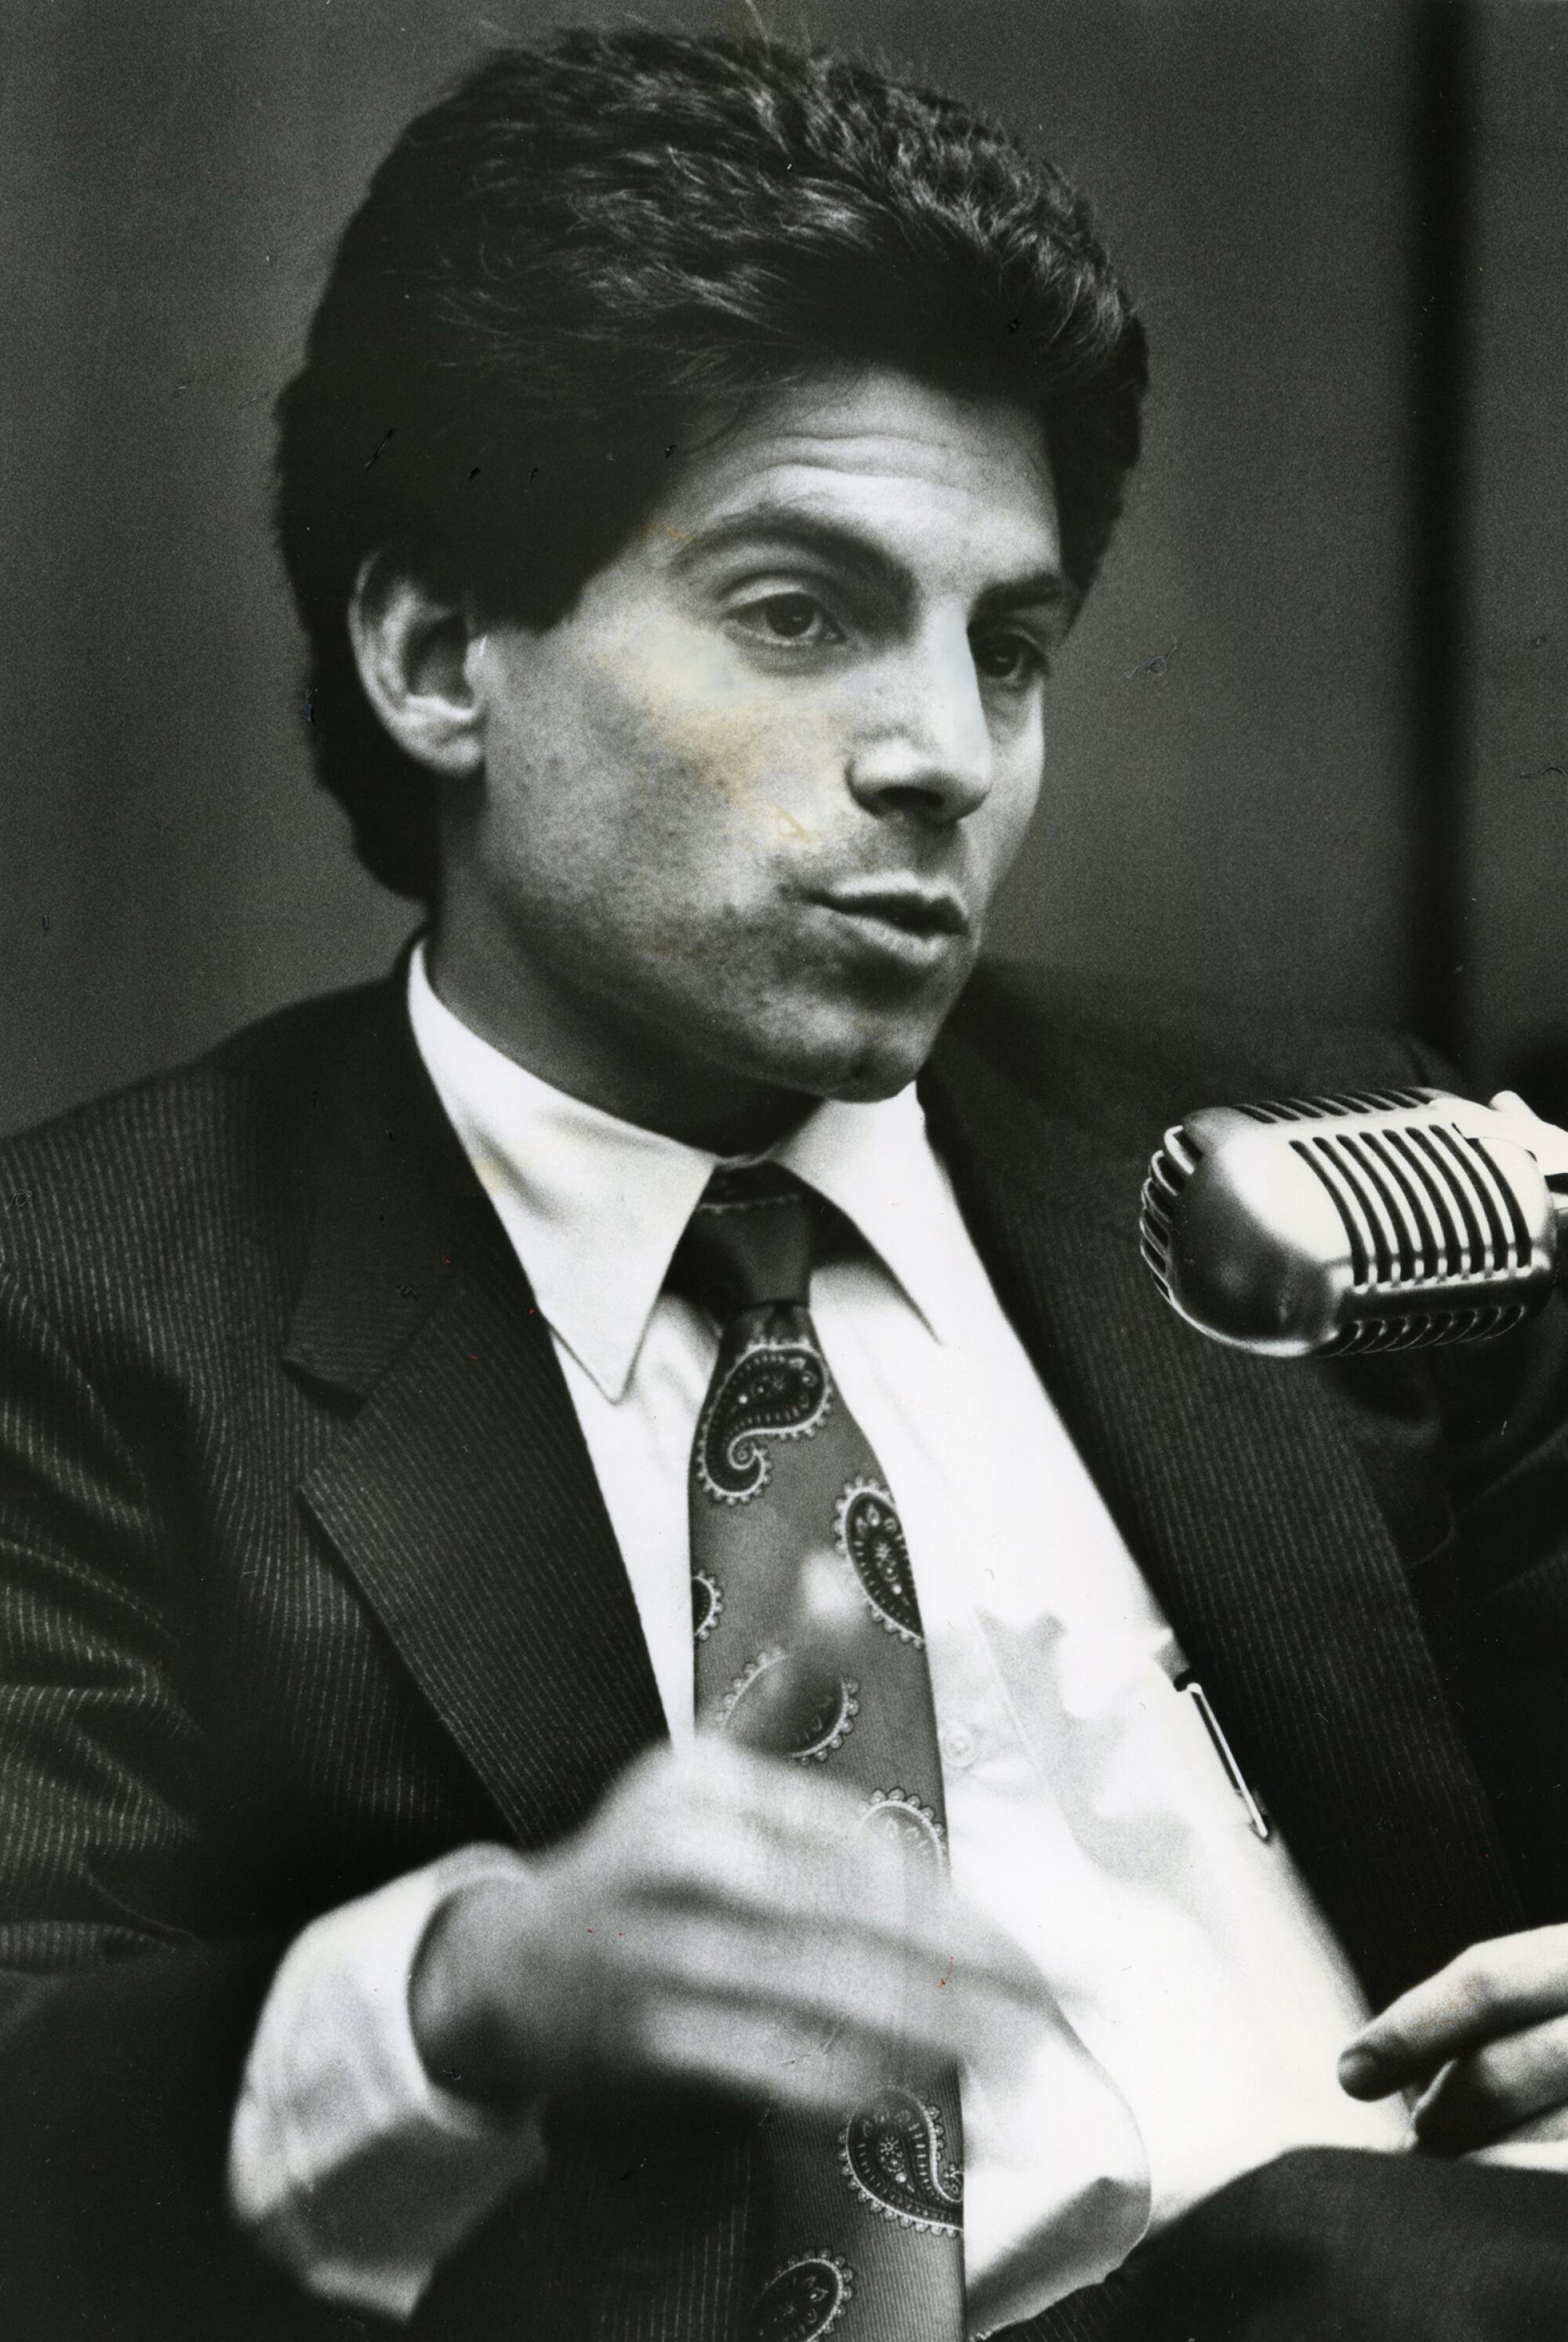 A man in a suit speaks into a microphone.